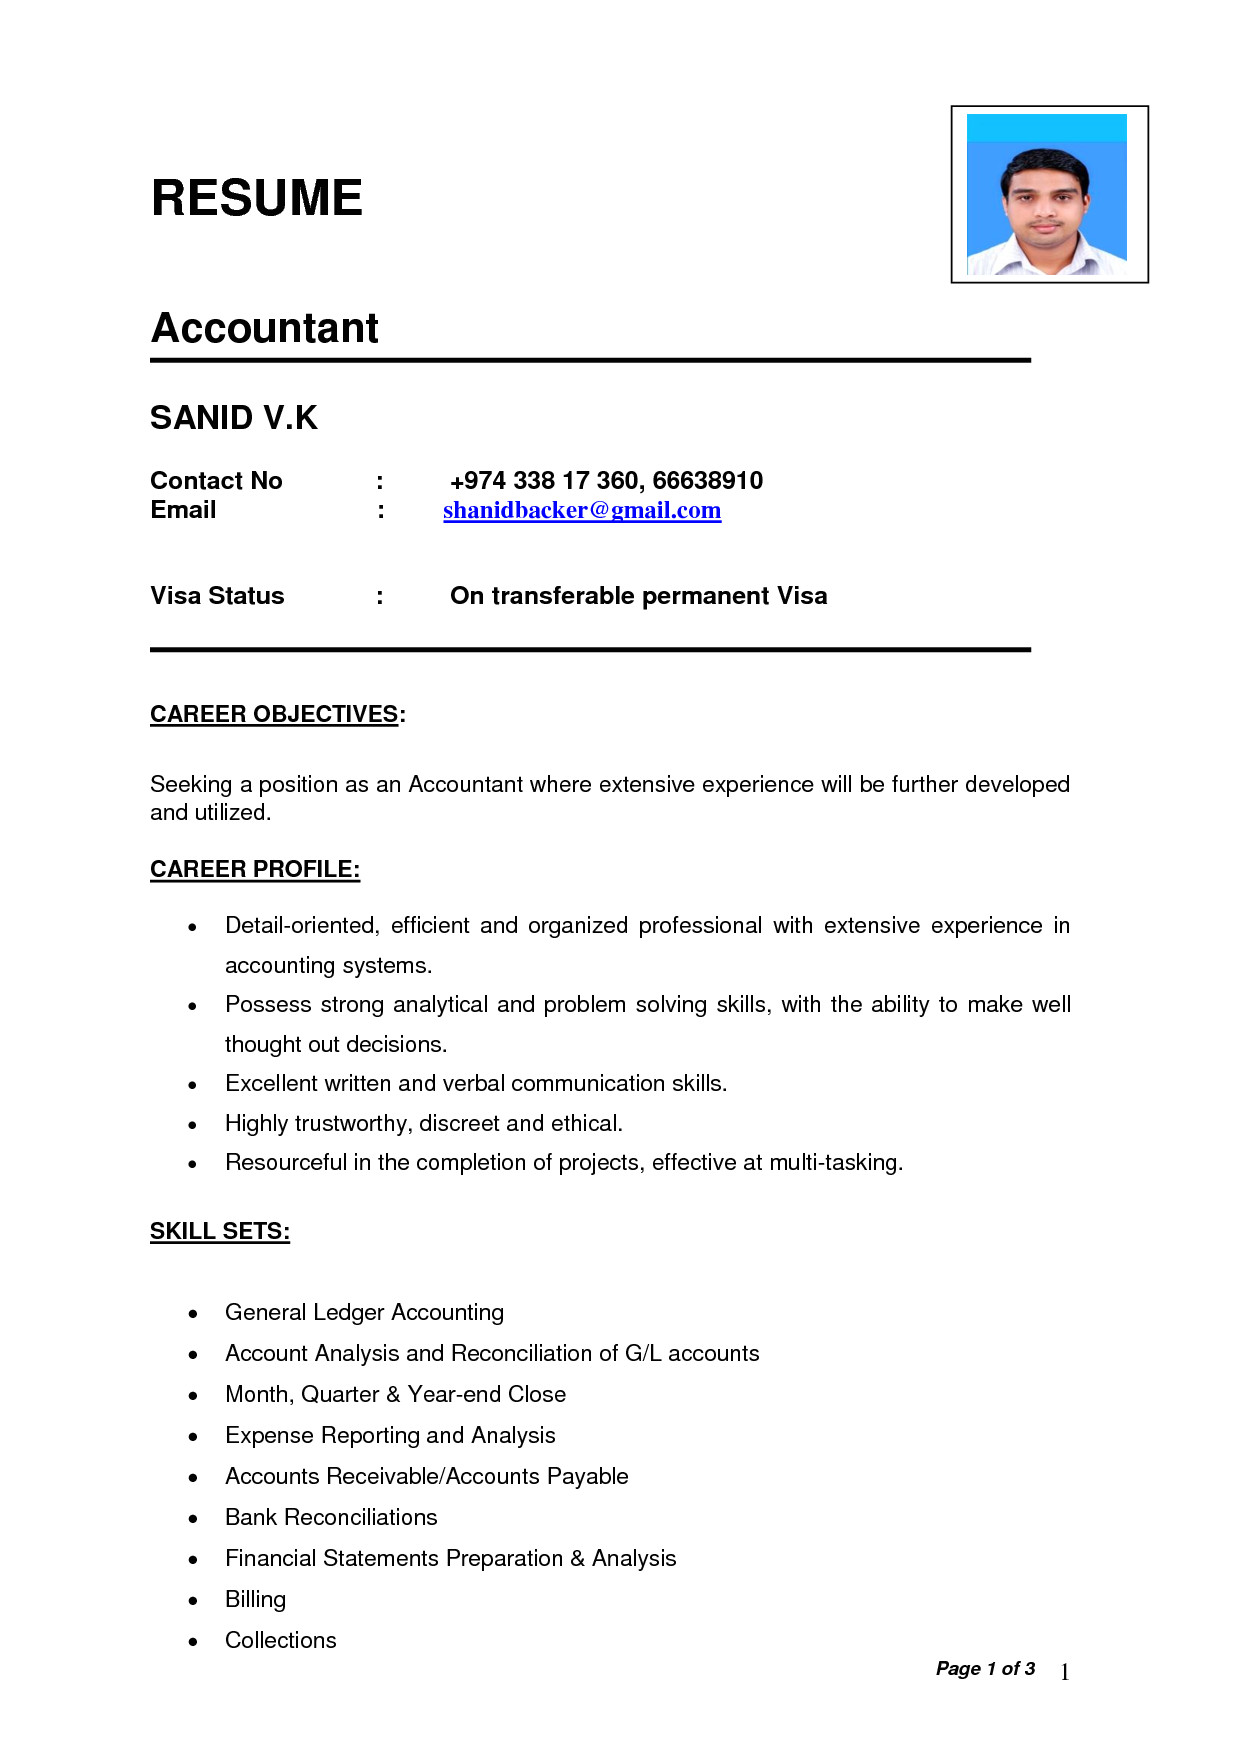 Indian Simple Resume format Pdf Resume format Used In India format India Resume